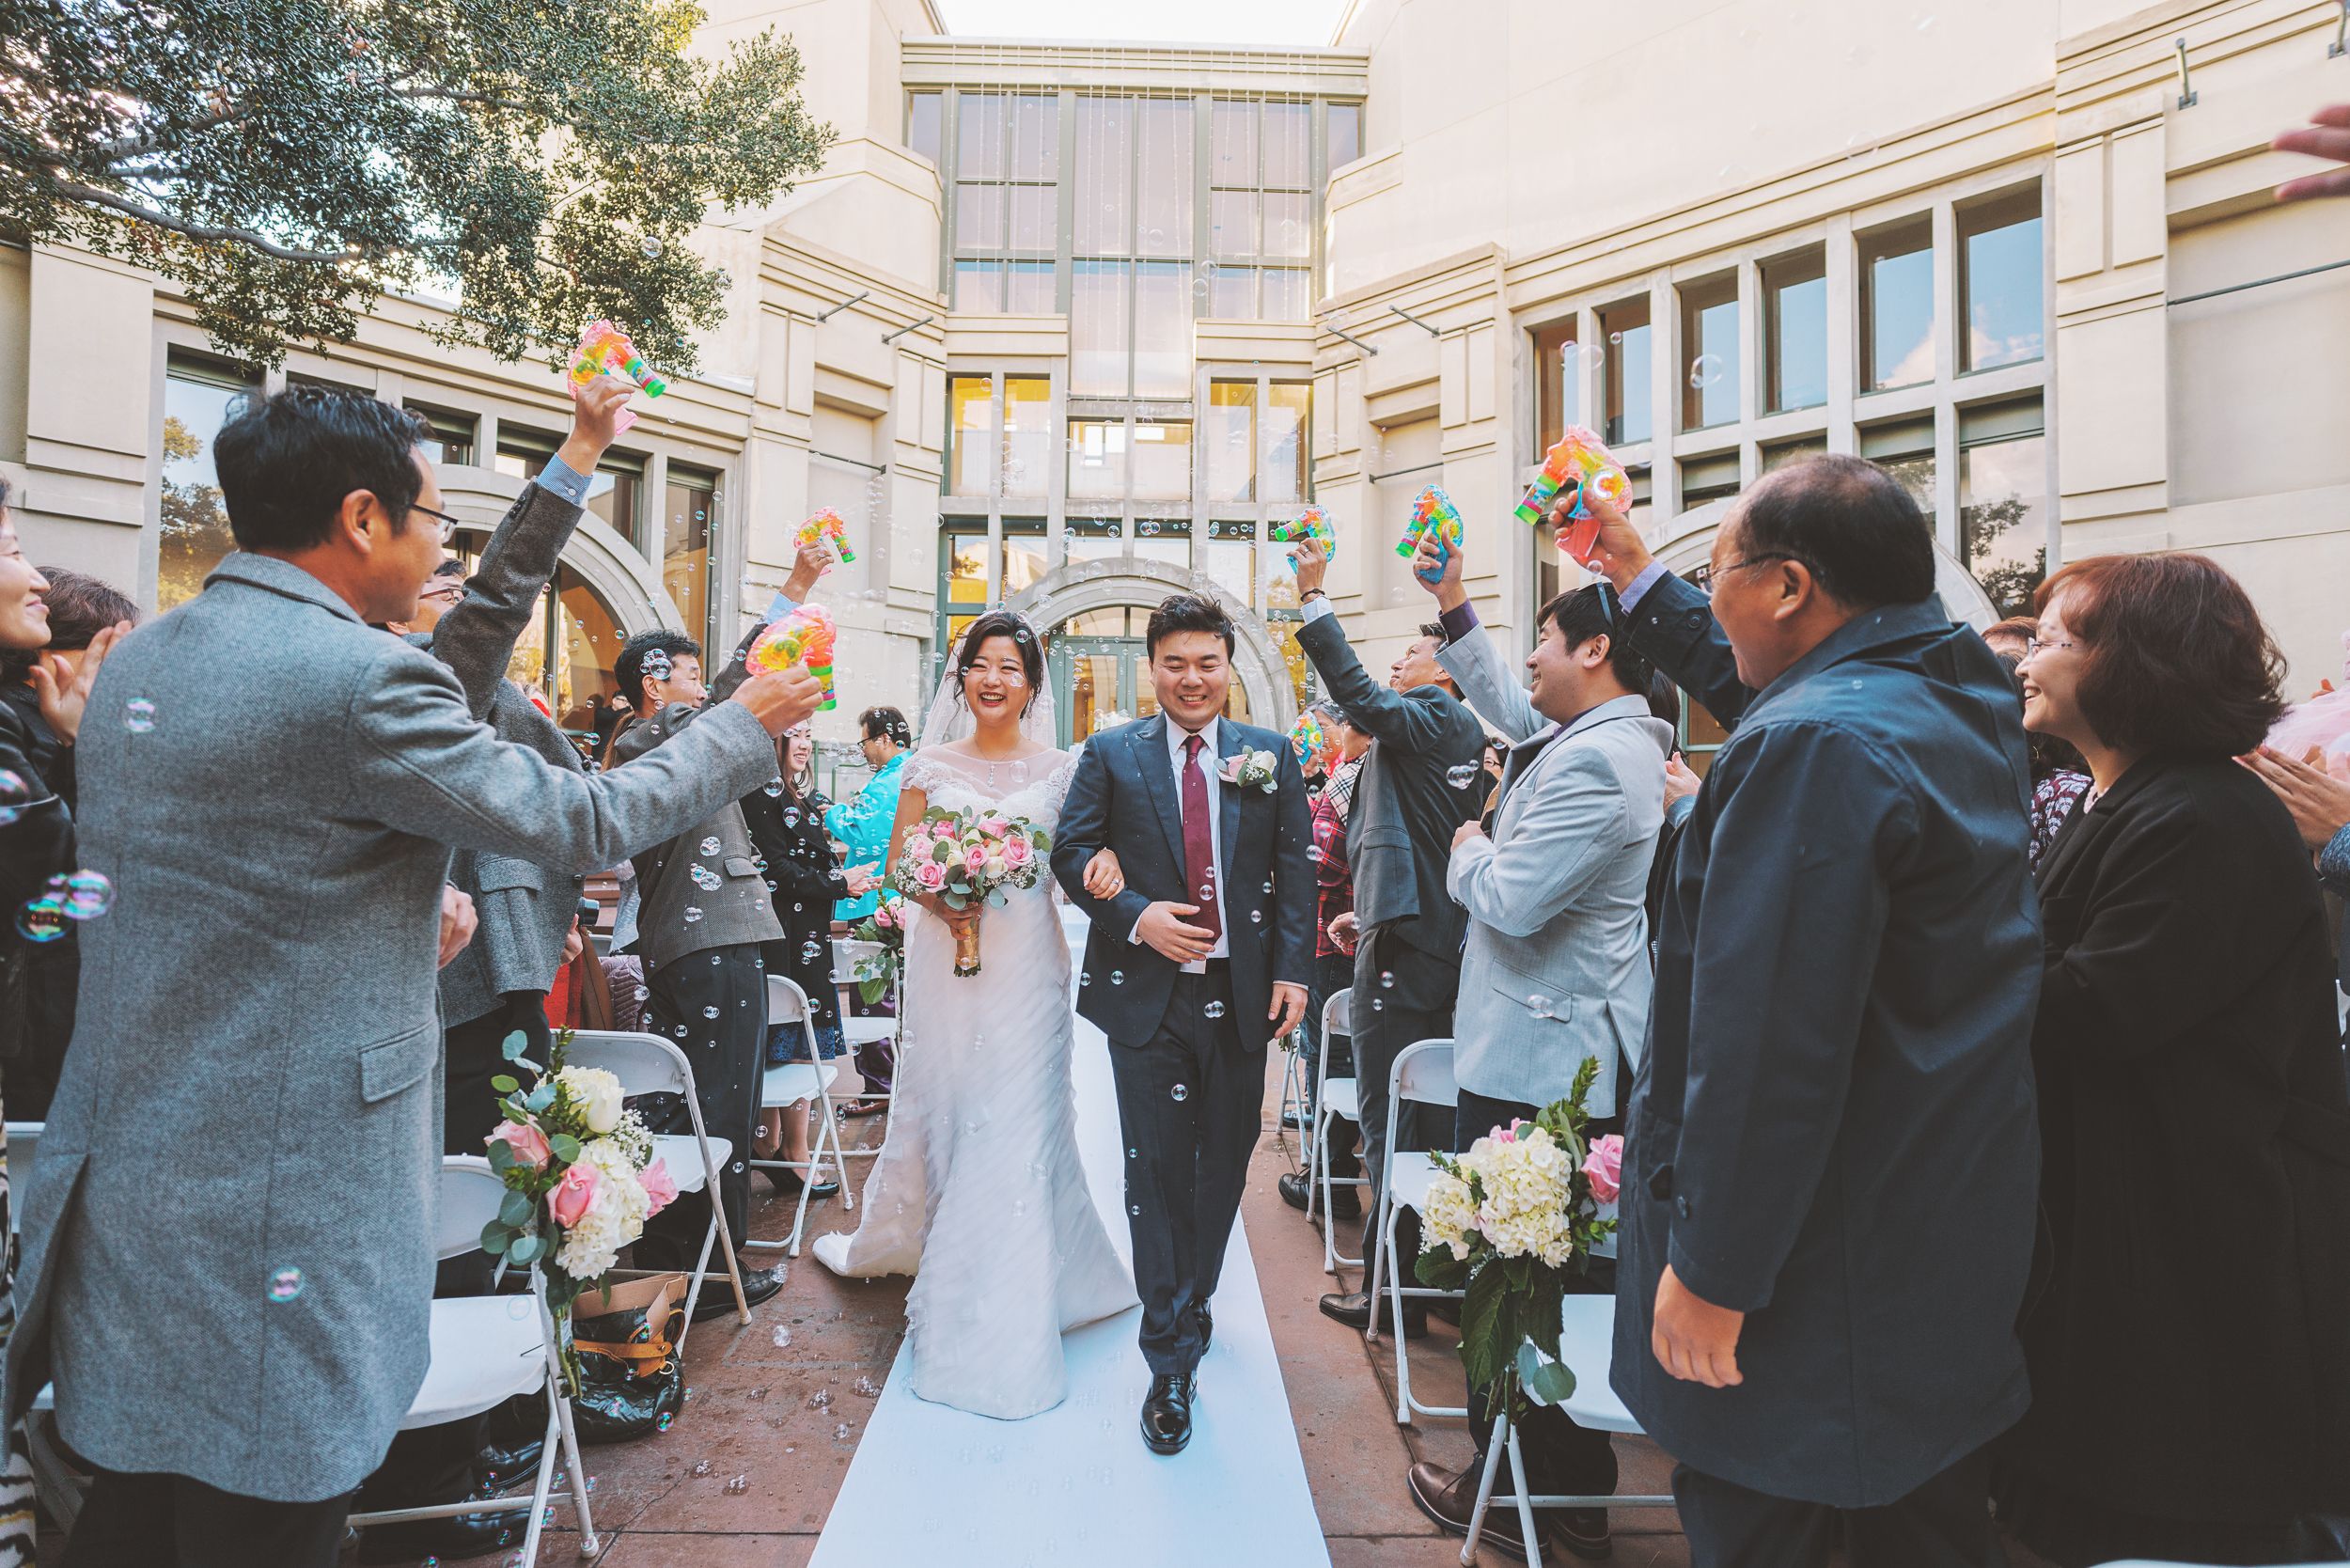 Couple walks down the Aisle after saying "I Do!"